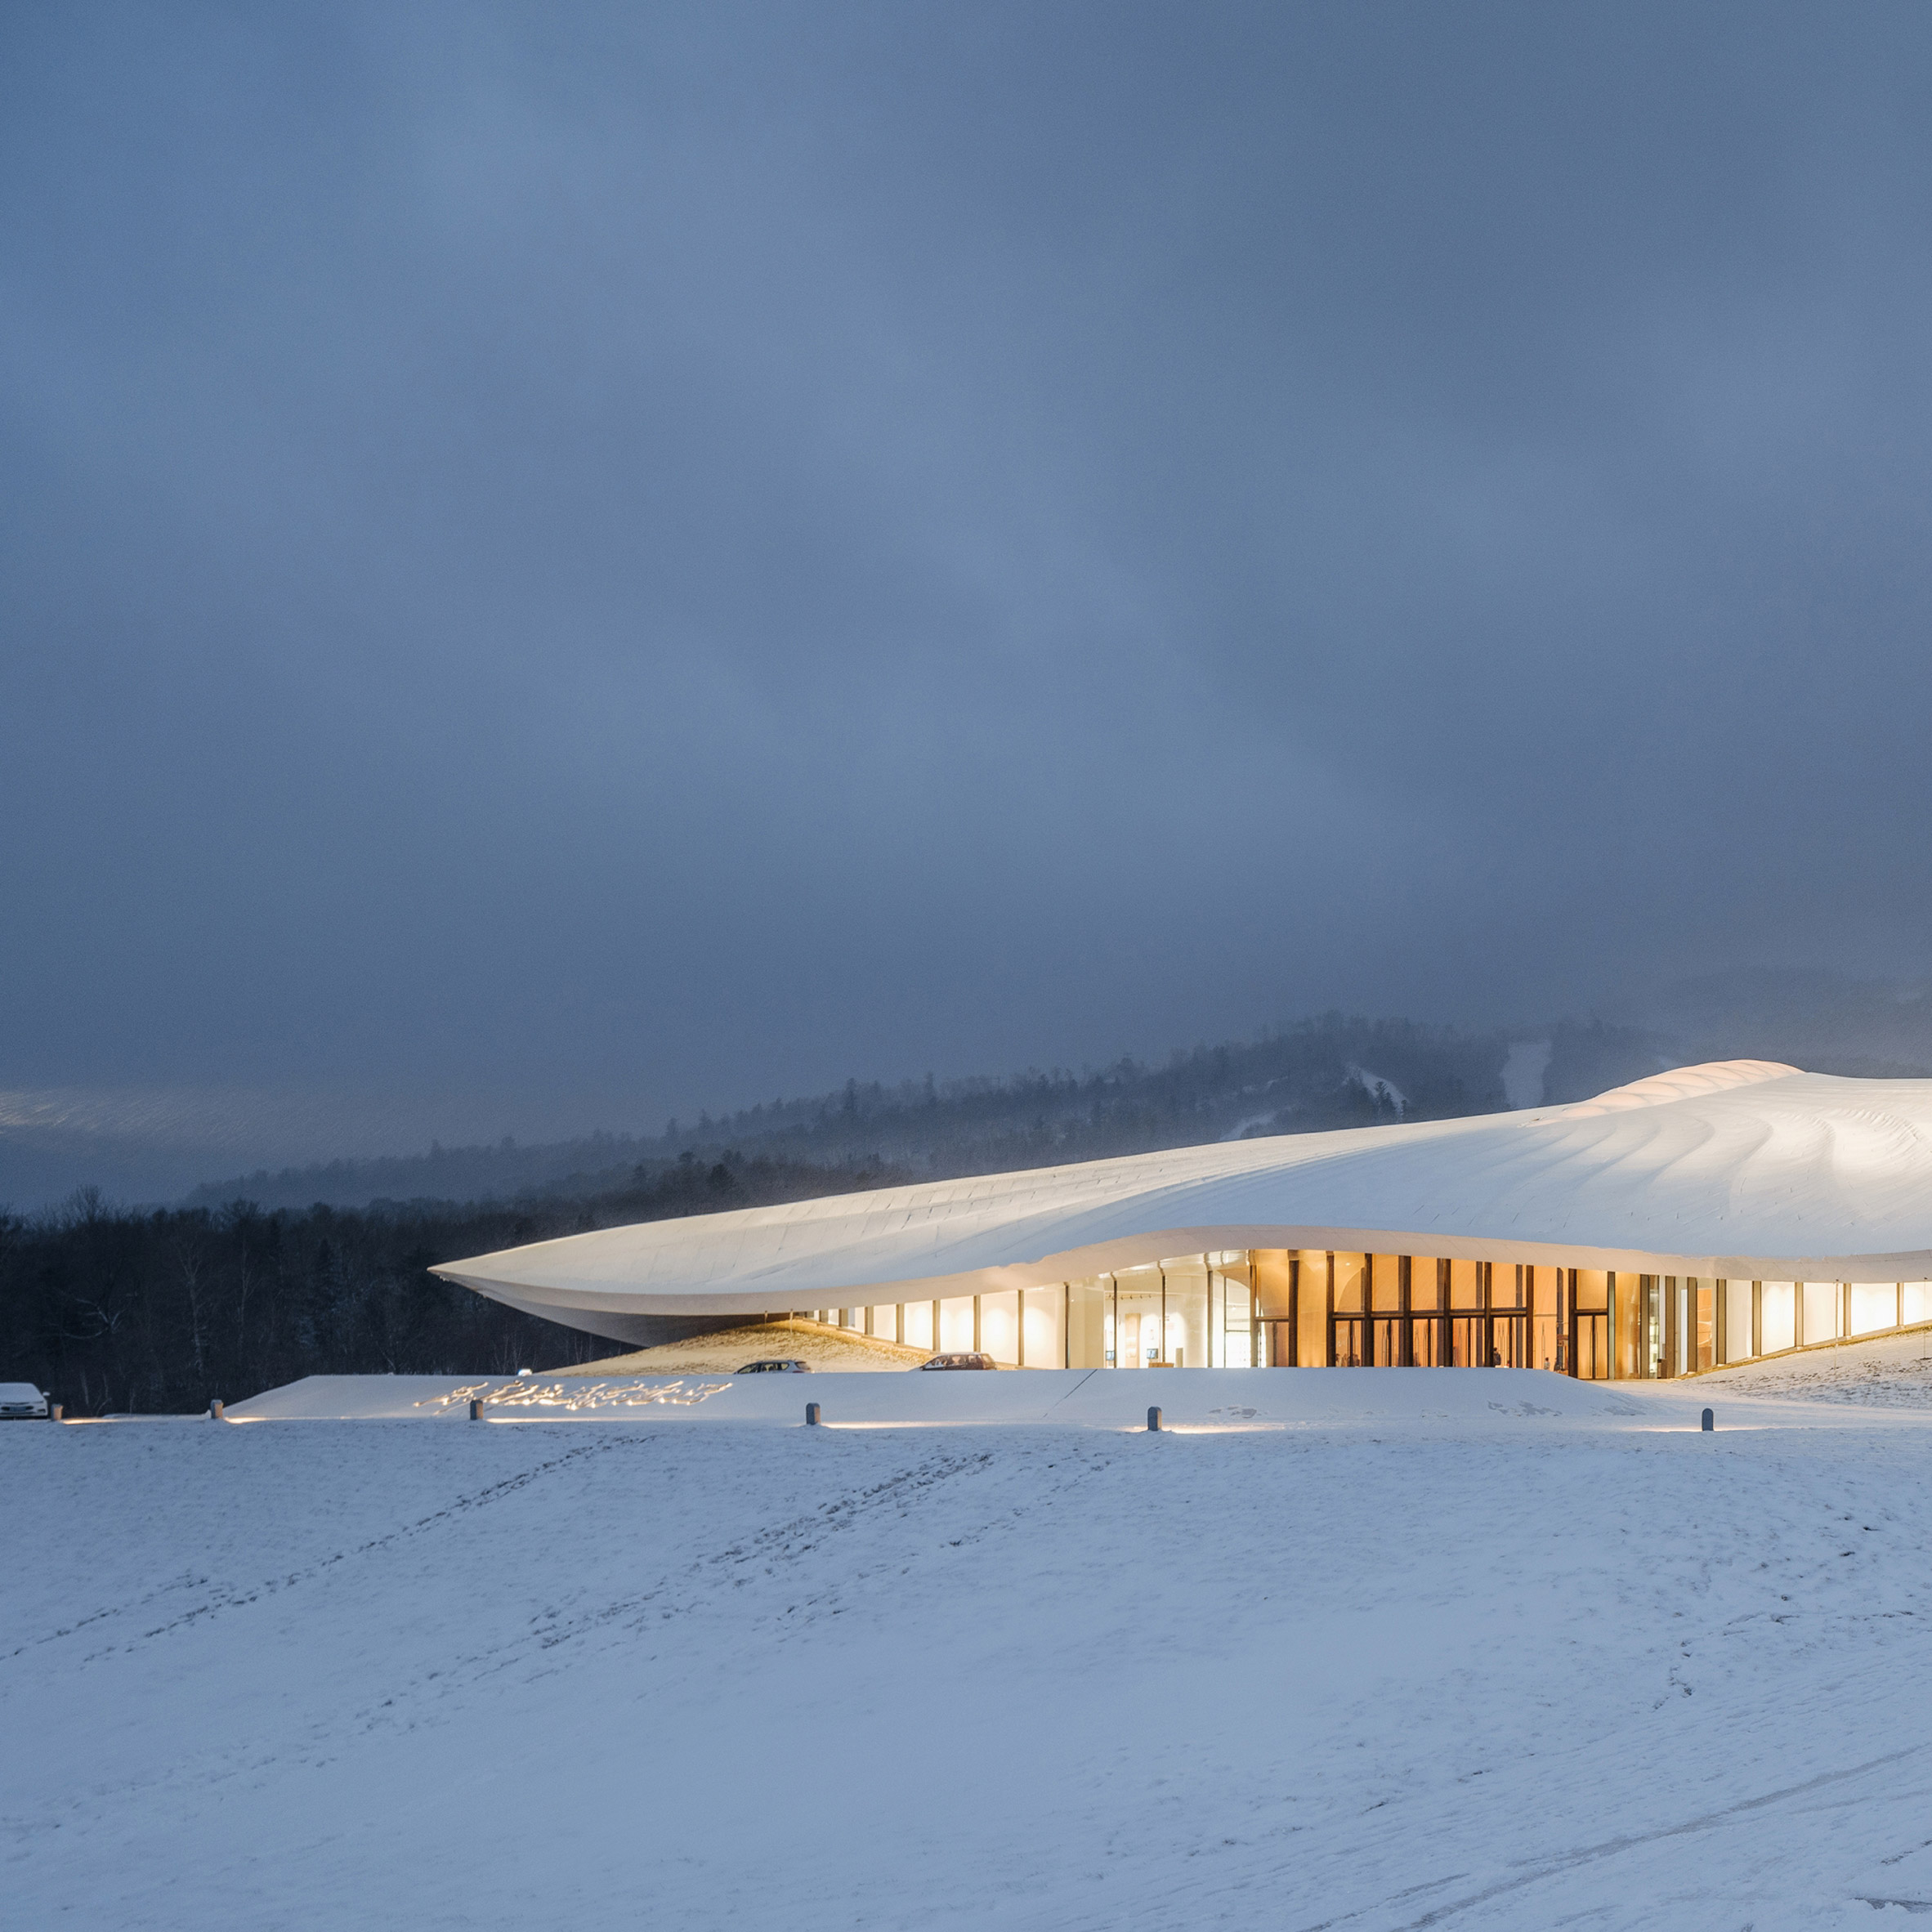 White conference centre with overhanging roof on white snow